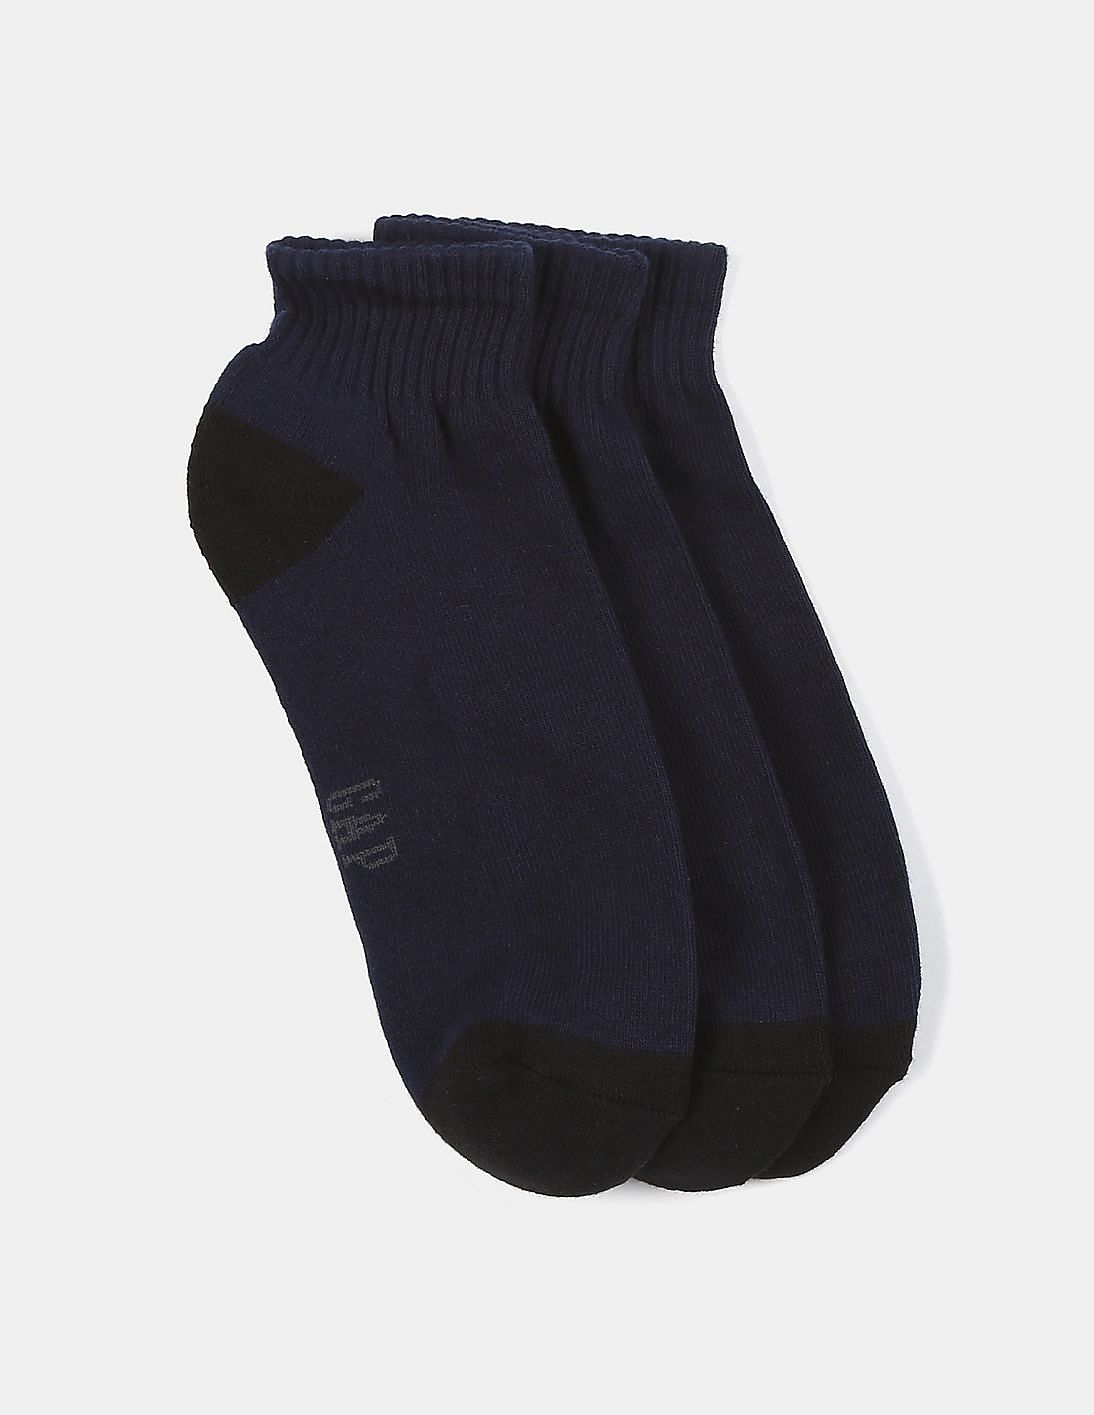 Buy GAP Men Navy Ribbed Cuffs Ankle Length Socks - Pack Of 3 - NNNOW.com